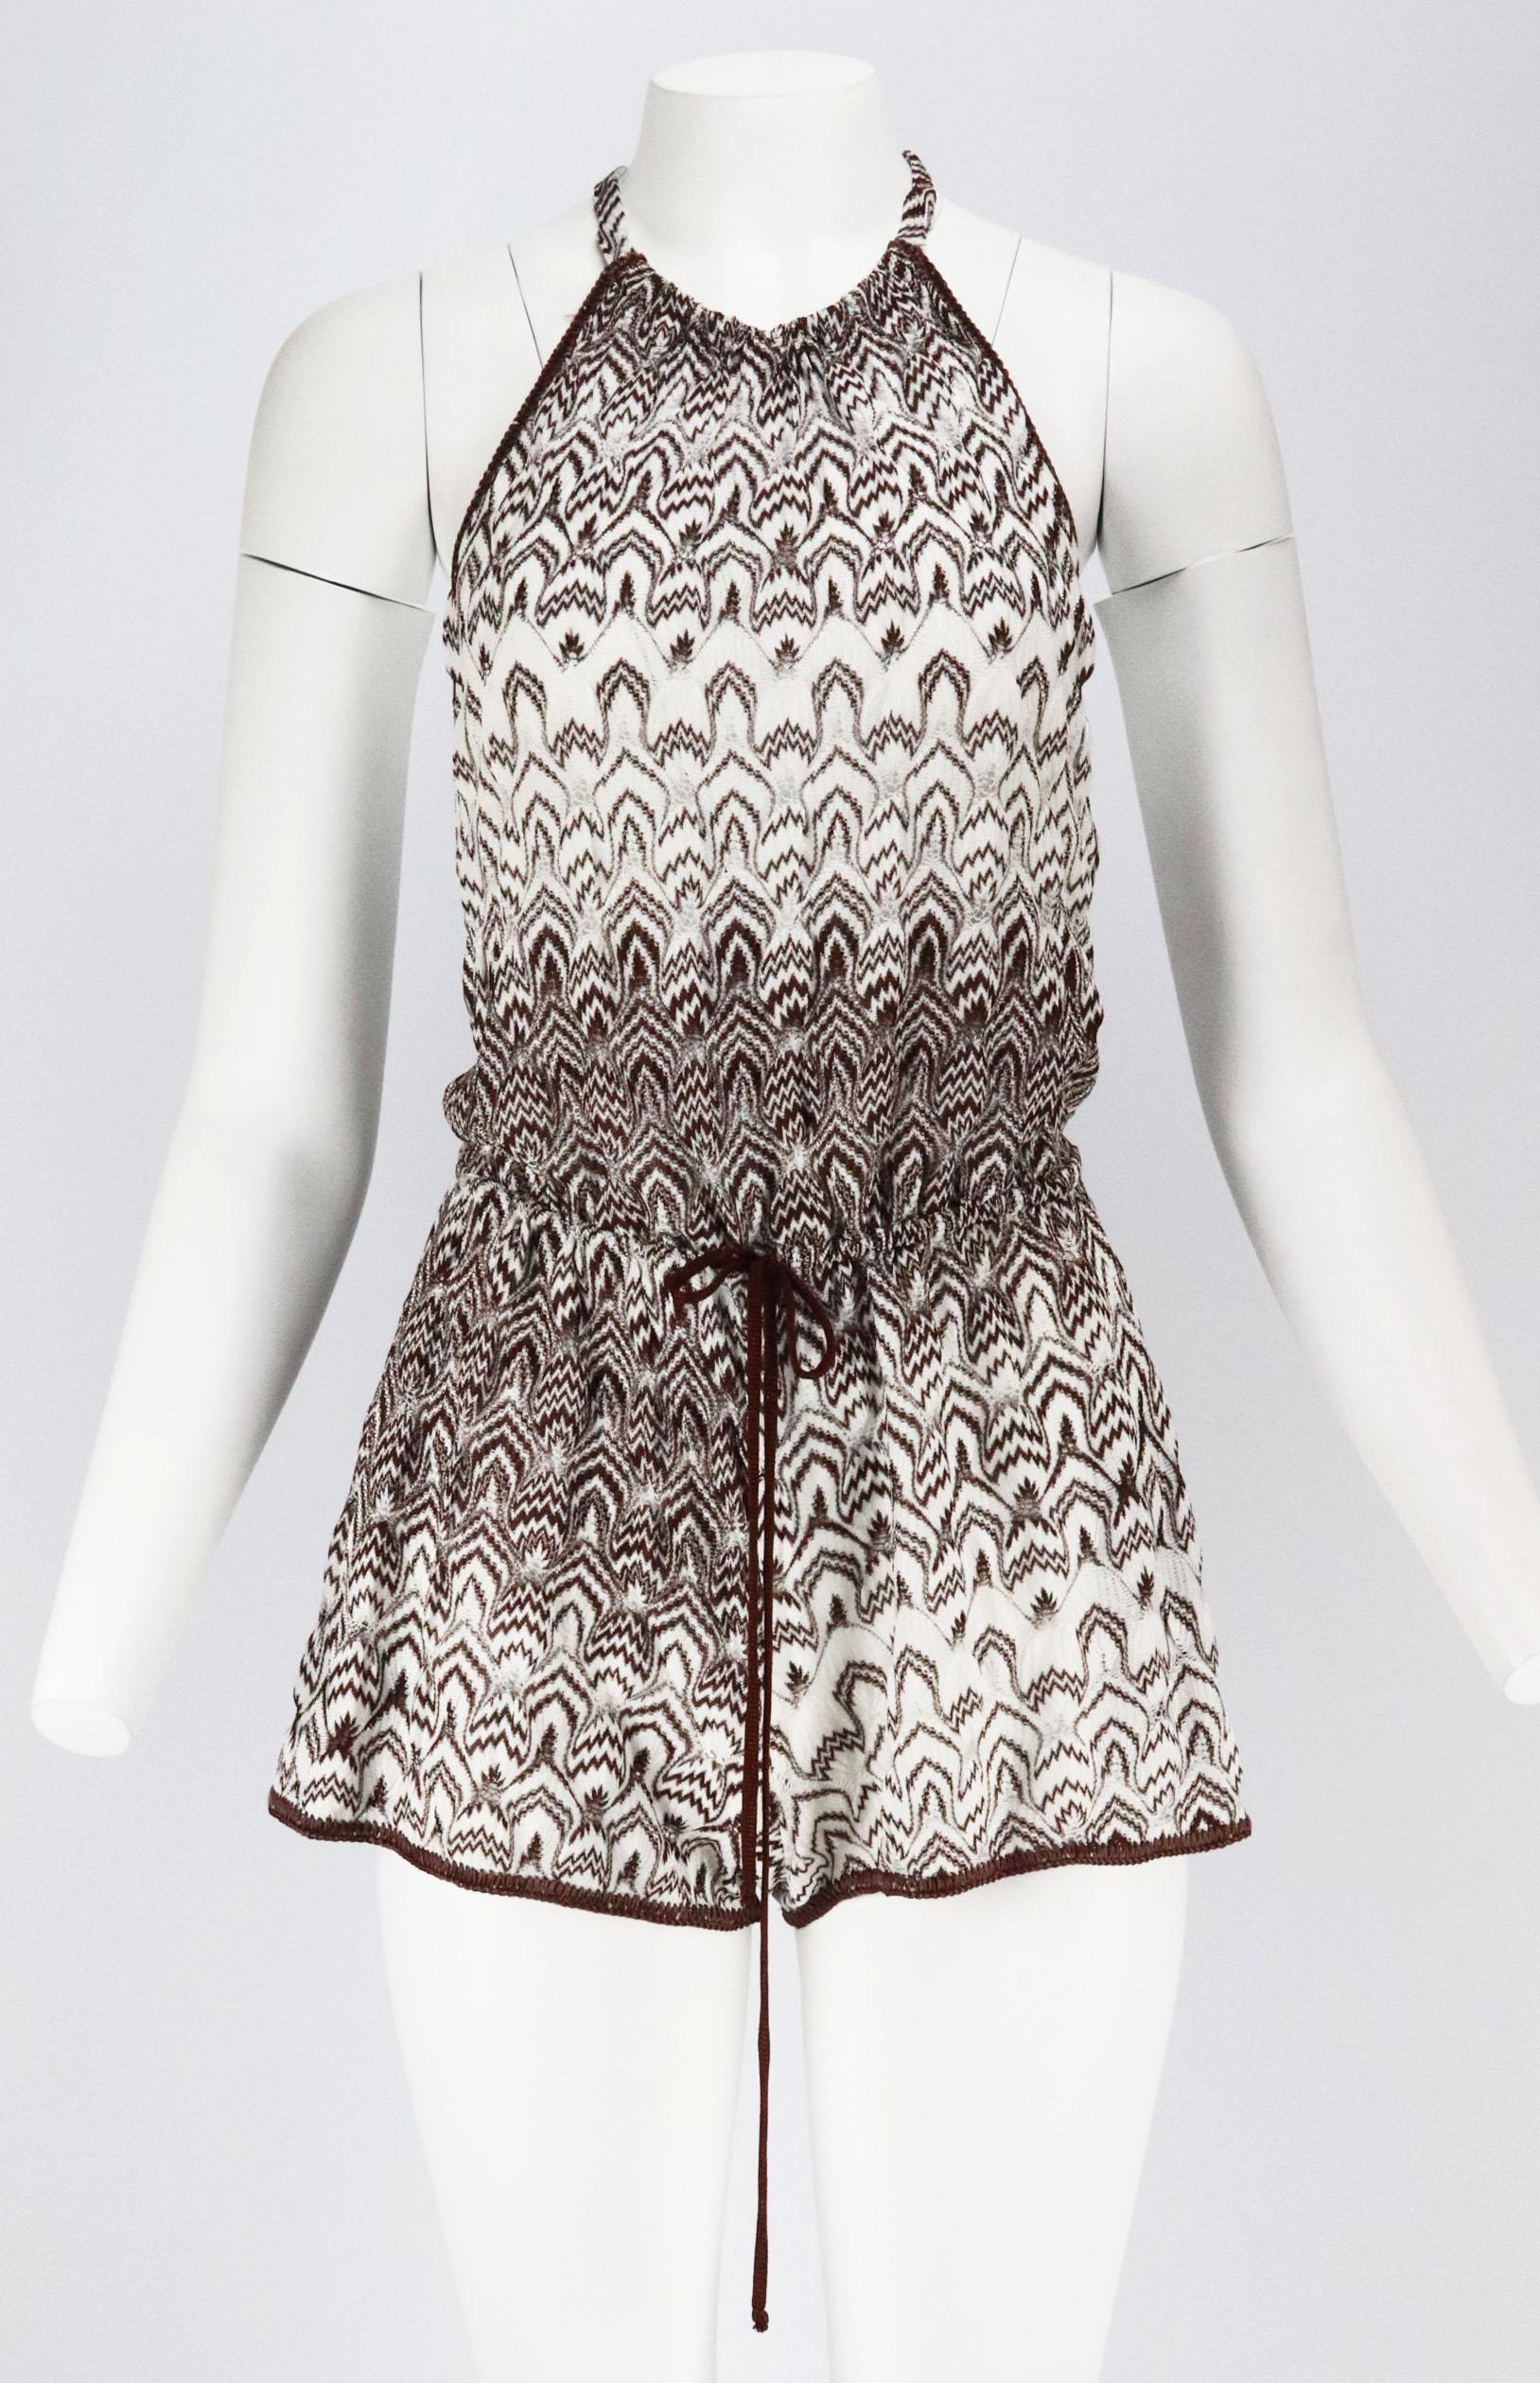 Missoni works to the timescales of the mill before anything else, this playsuit has been crochet-knitted in Italy using yarns in house's trademark a spectrum of colours, including brown and white in a halterneck silhouette with tie waist to cinch it